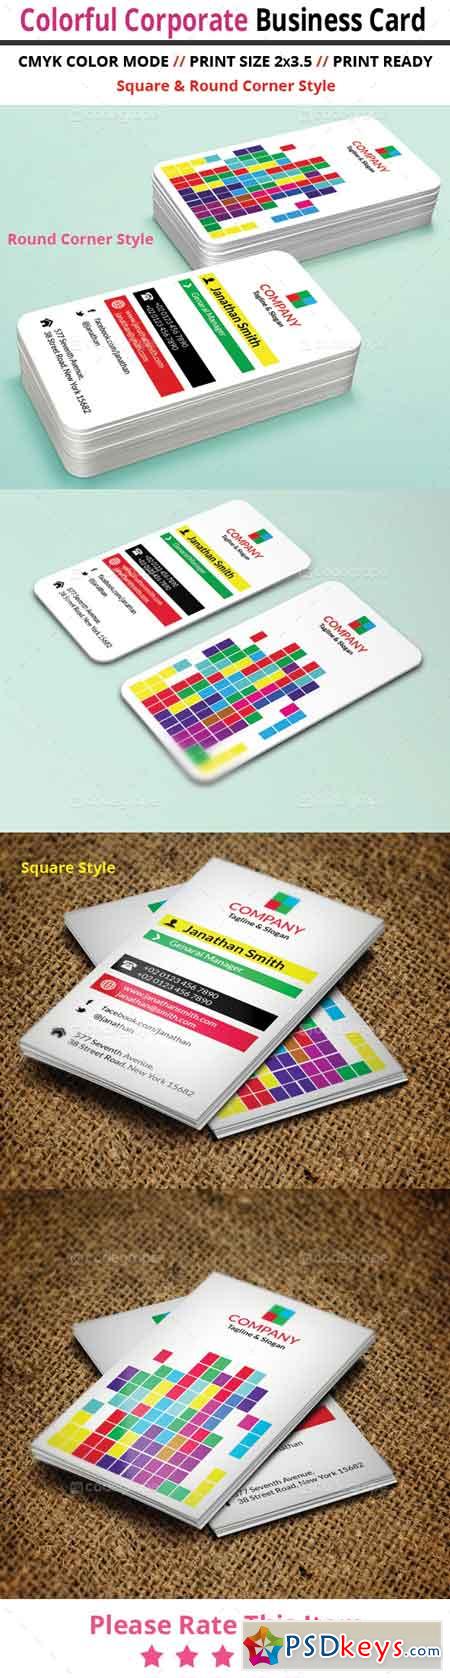 Colorful Corporate Business Card 5922